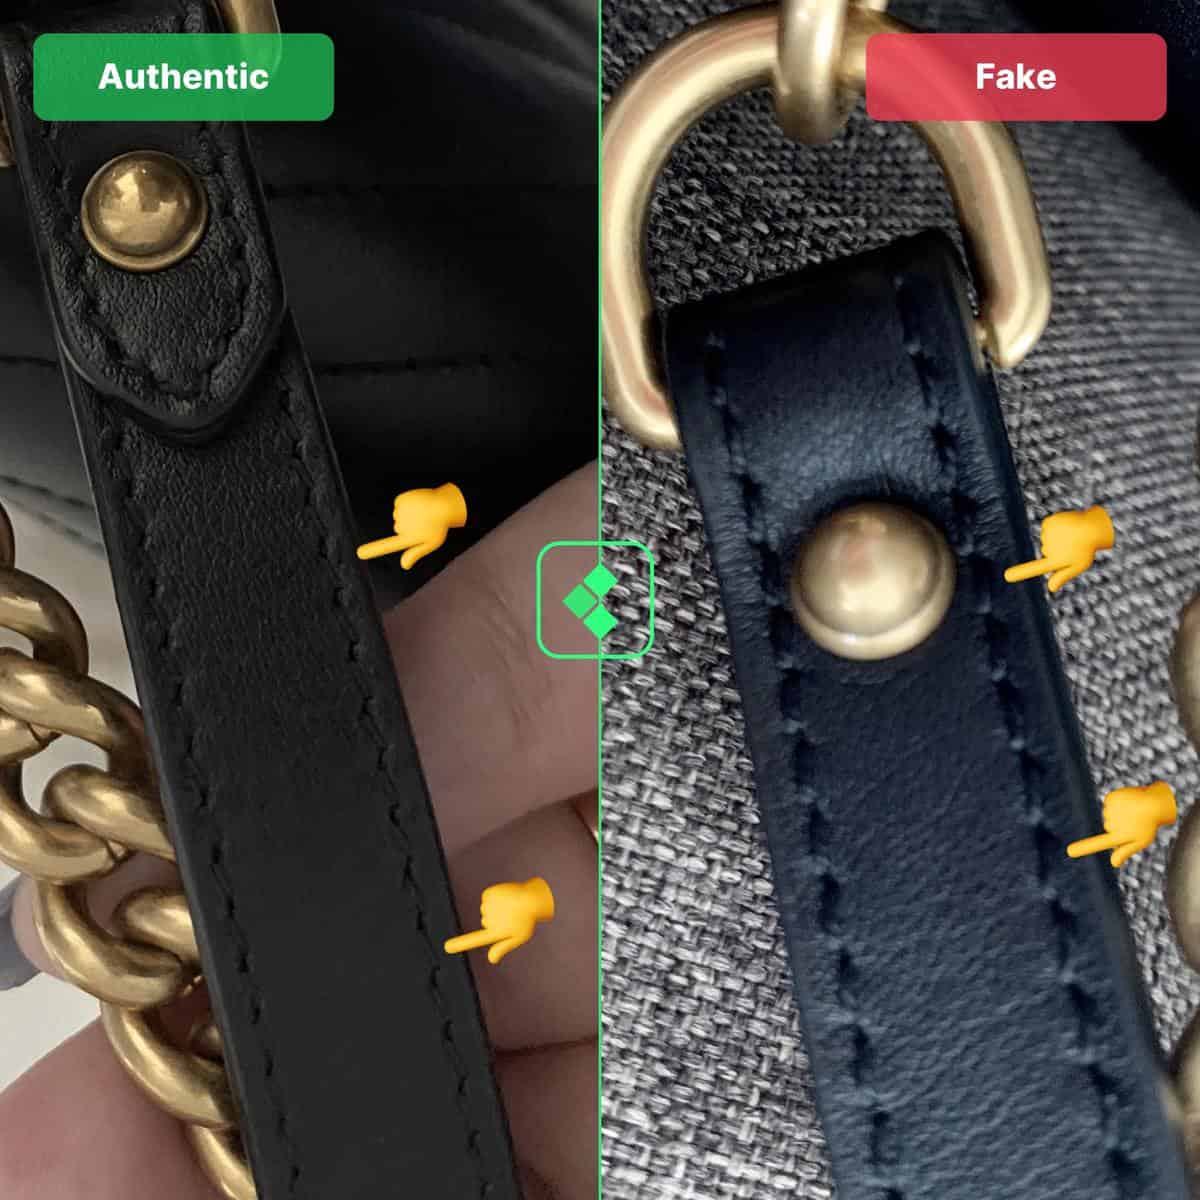 GUCCI Bag, How to spot Real or Fake!